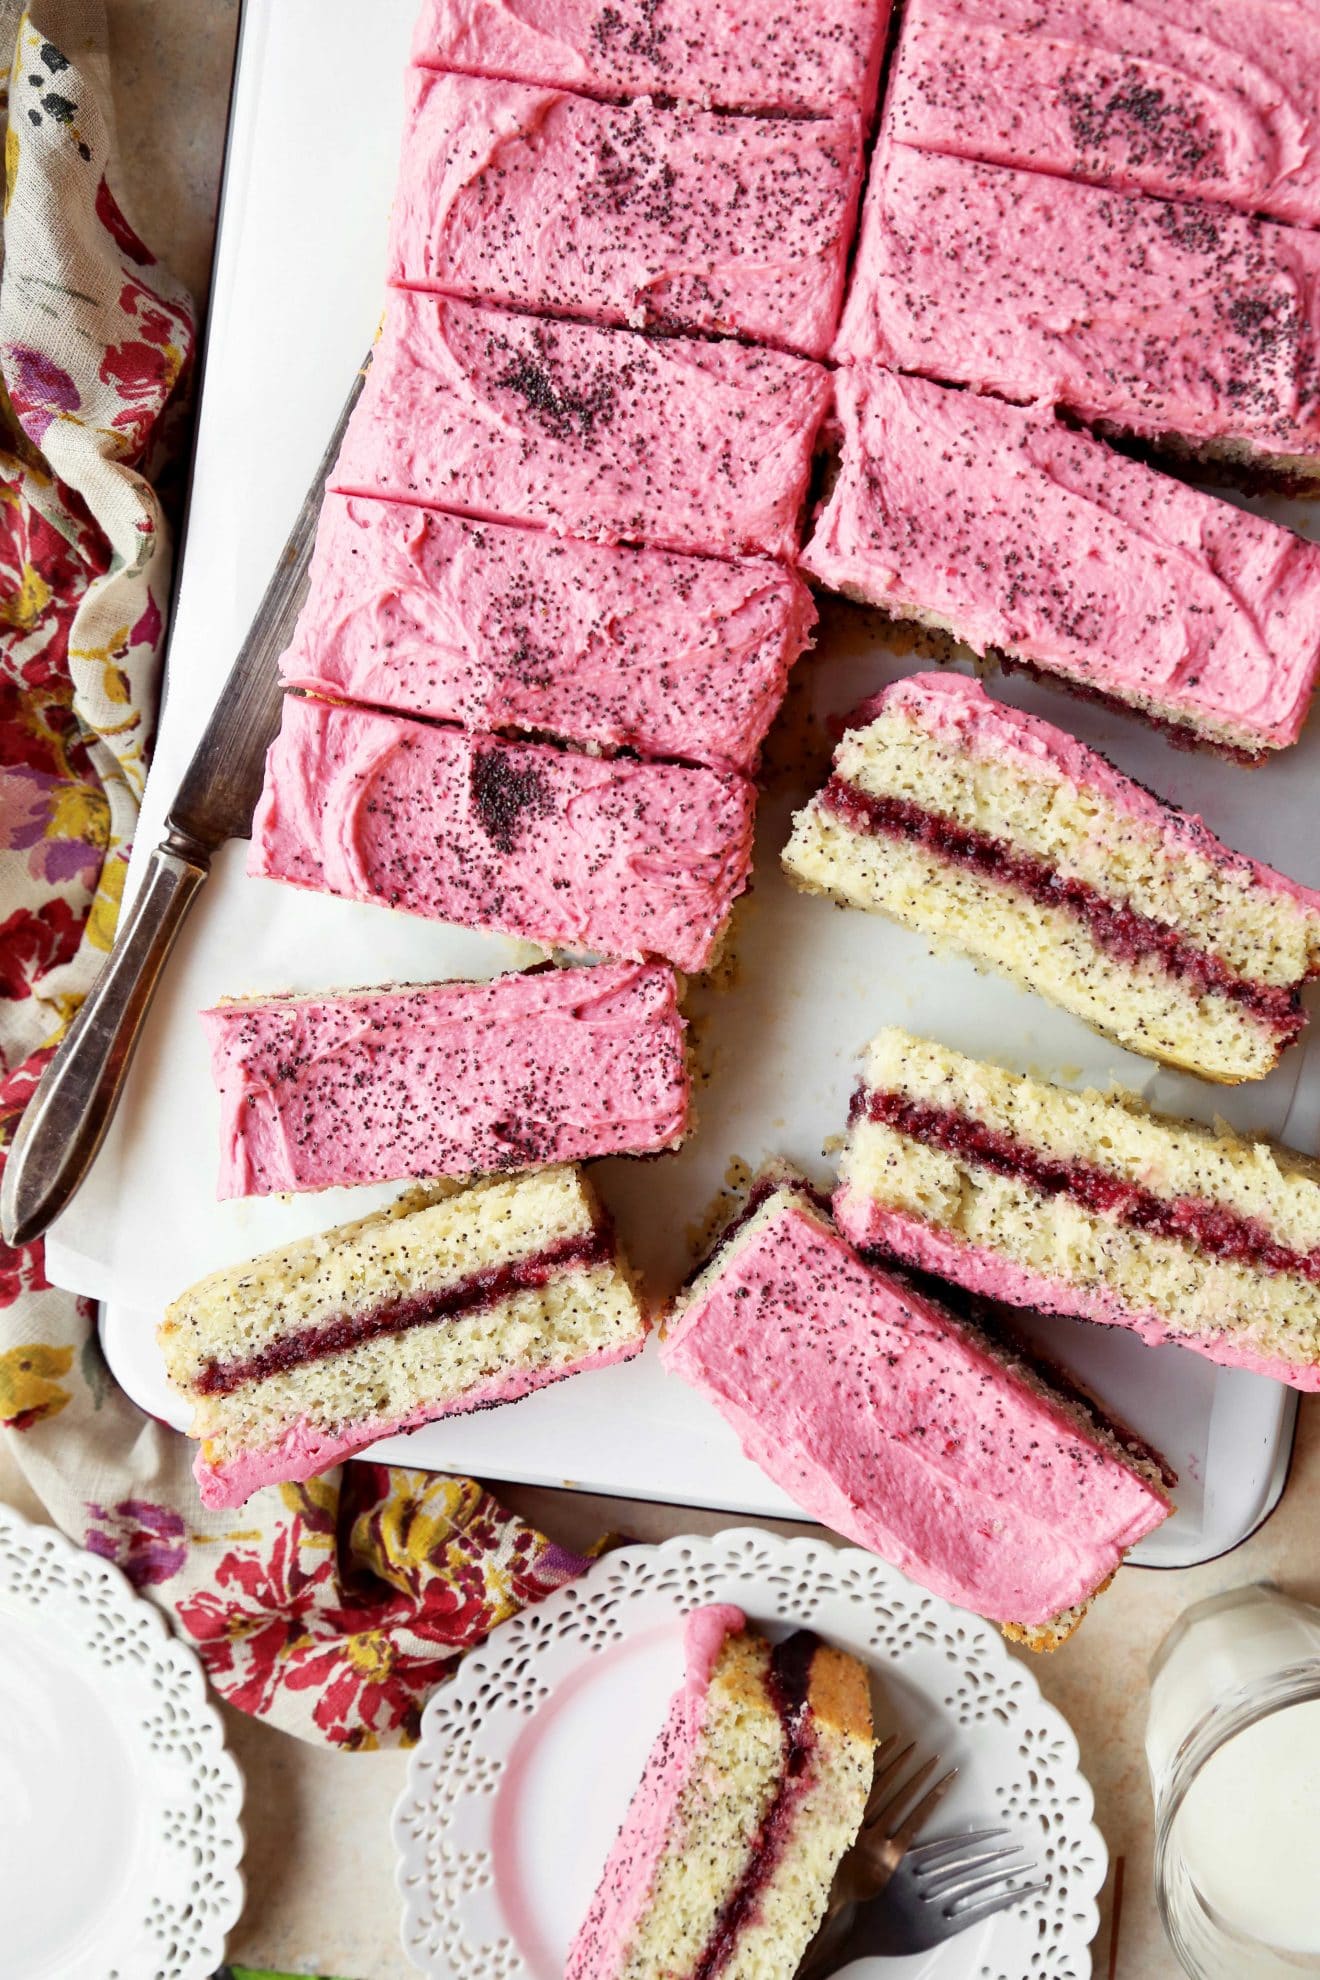 Raspberry Lemon Poppy Seed Snacking Cake from thecandidappetite.com on foodiecrush.com